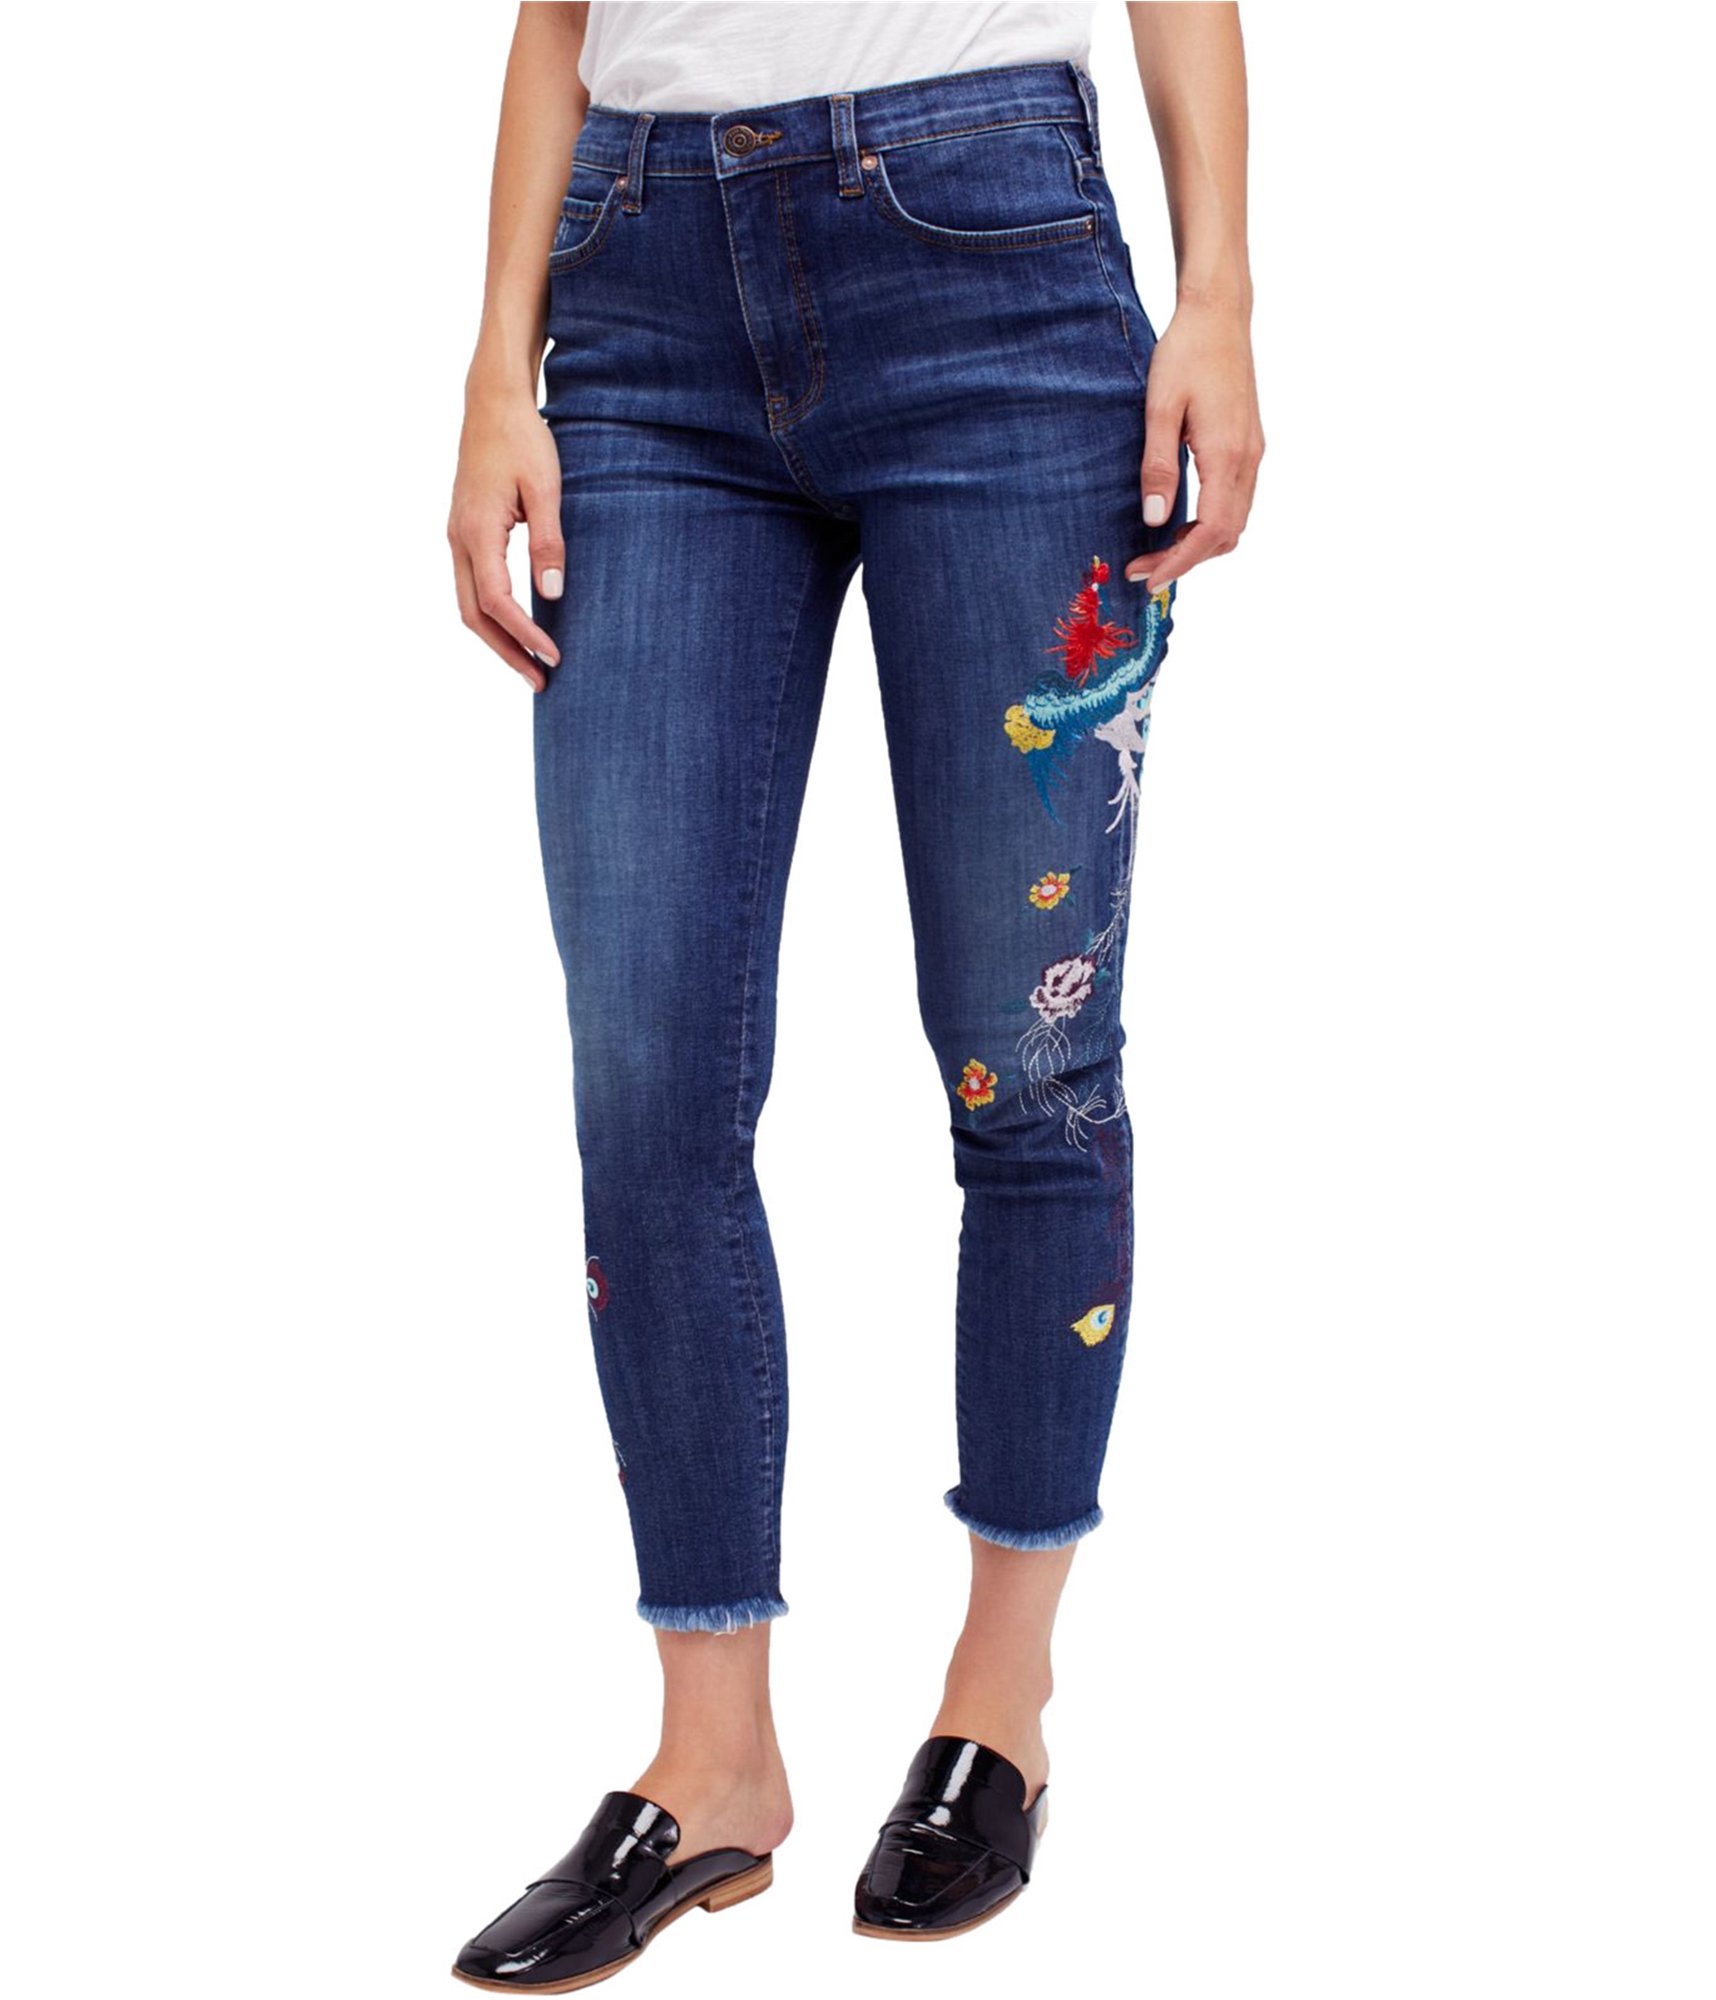 woman-wearing-embroidered-jeans